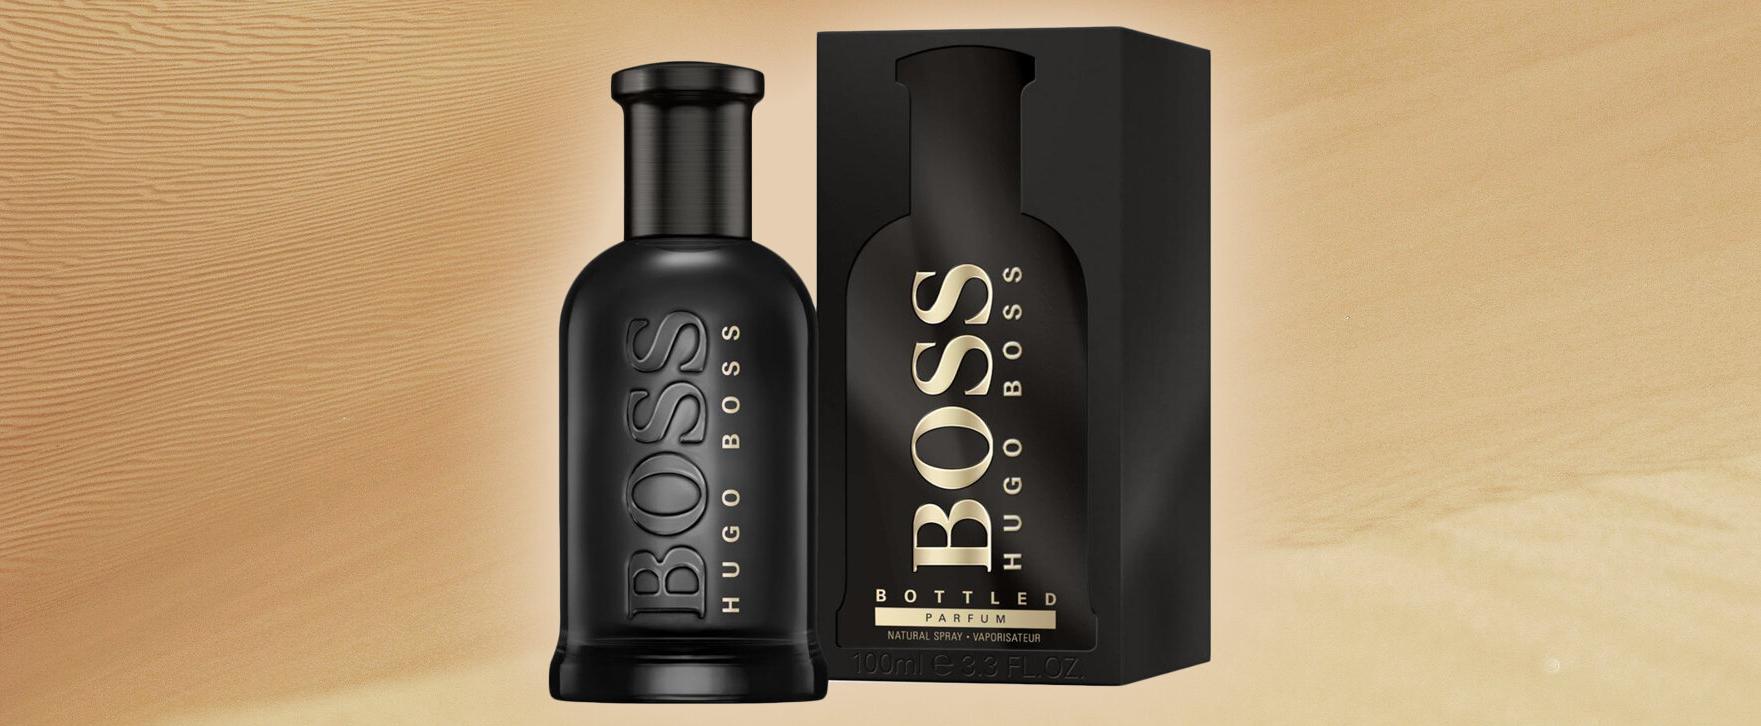 Hugo Boss Takes a Classic to the Next Level – The New “Boss Bottled Perfume”